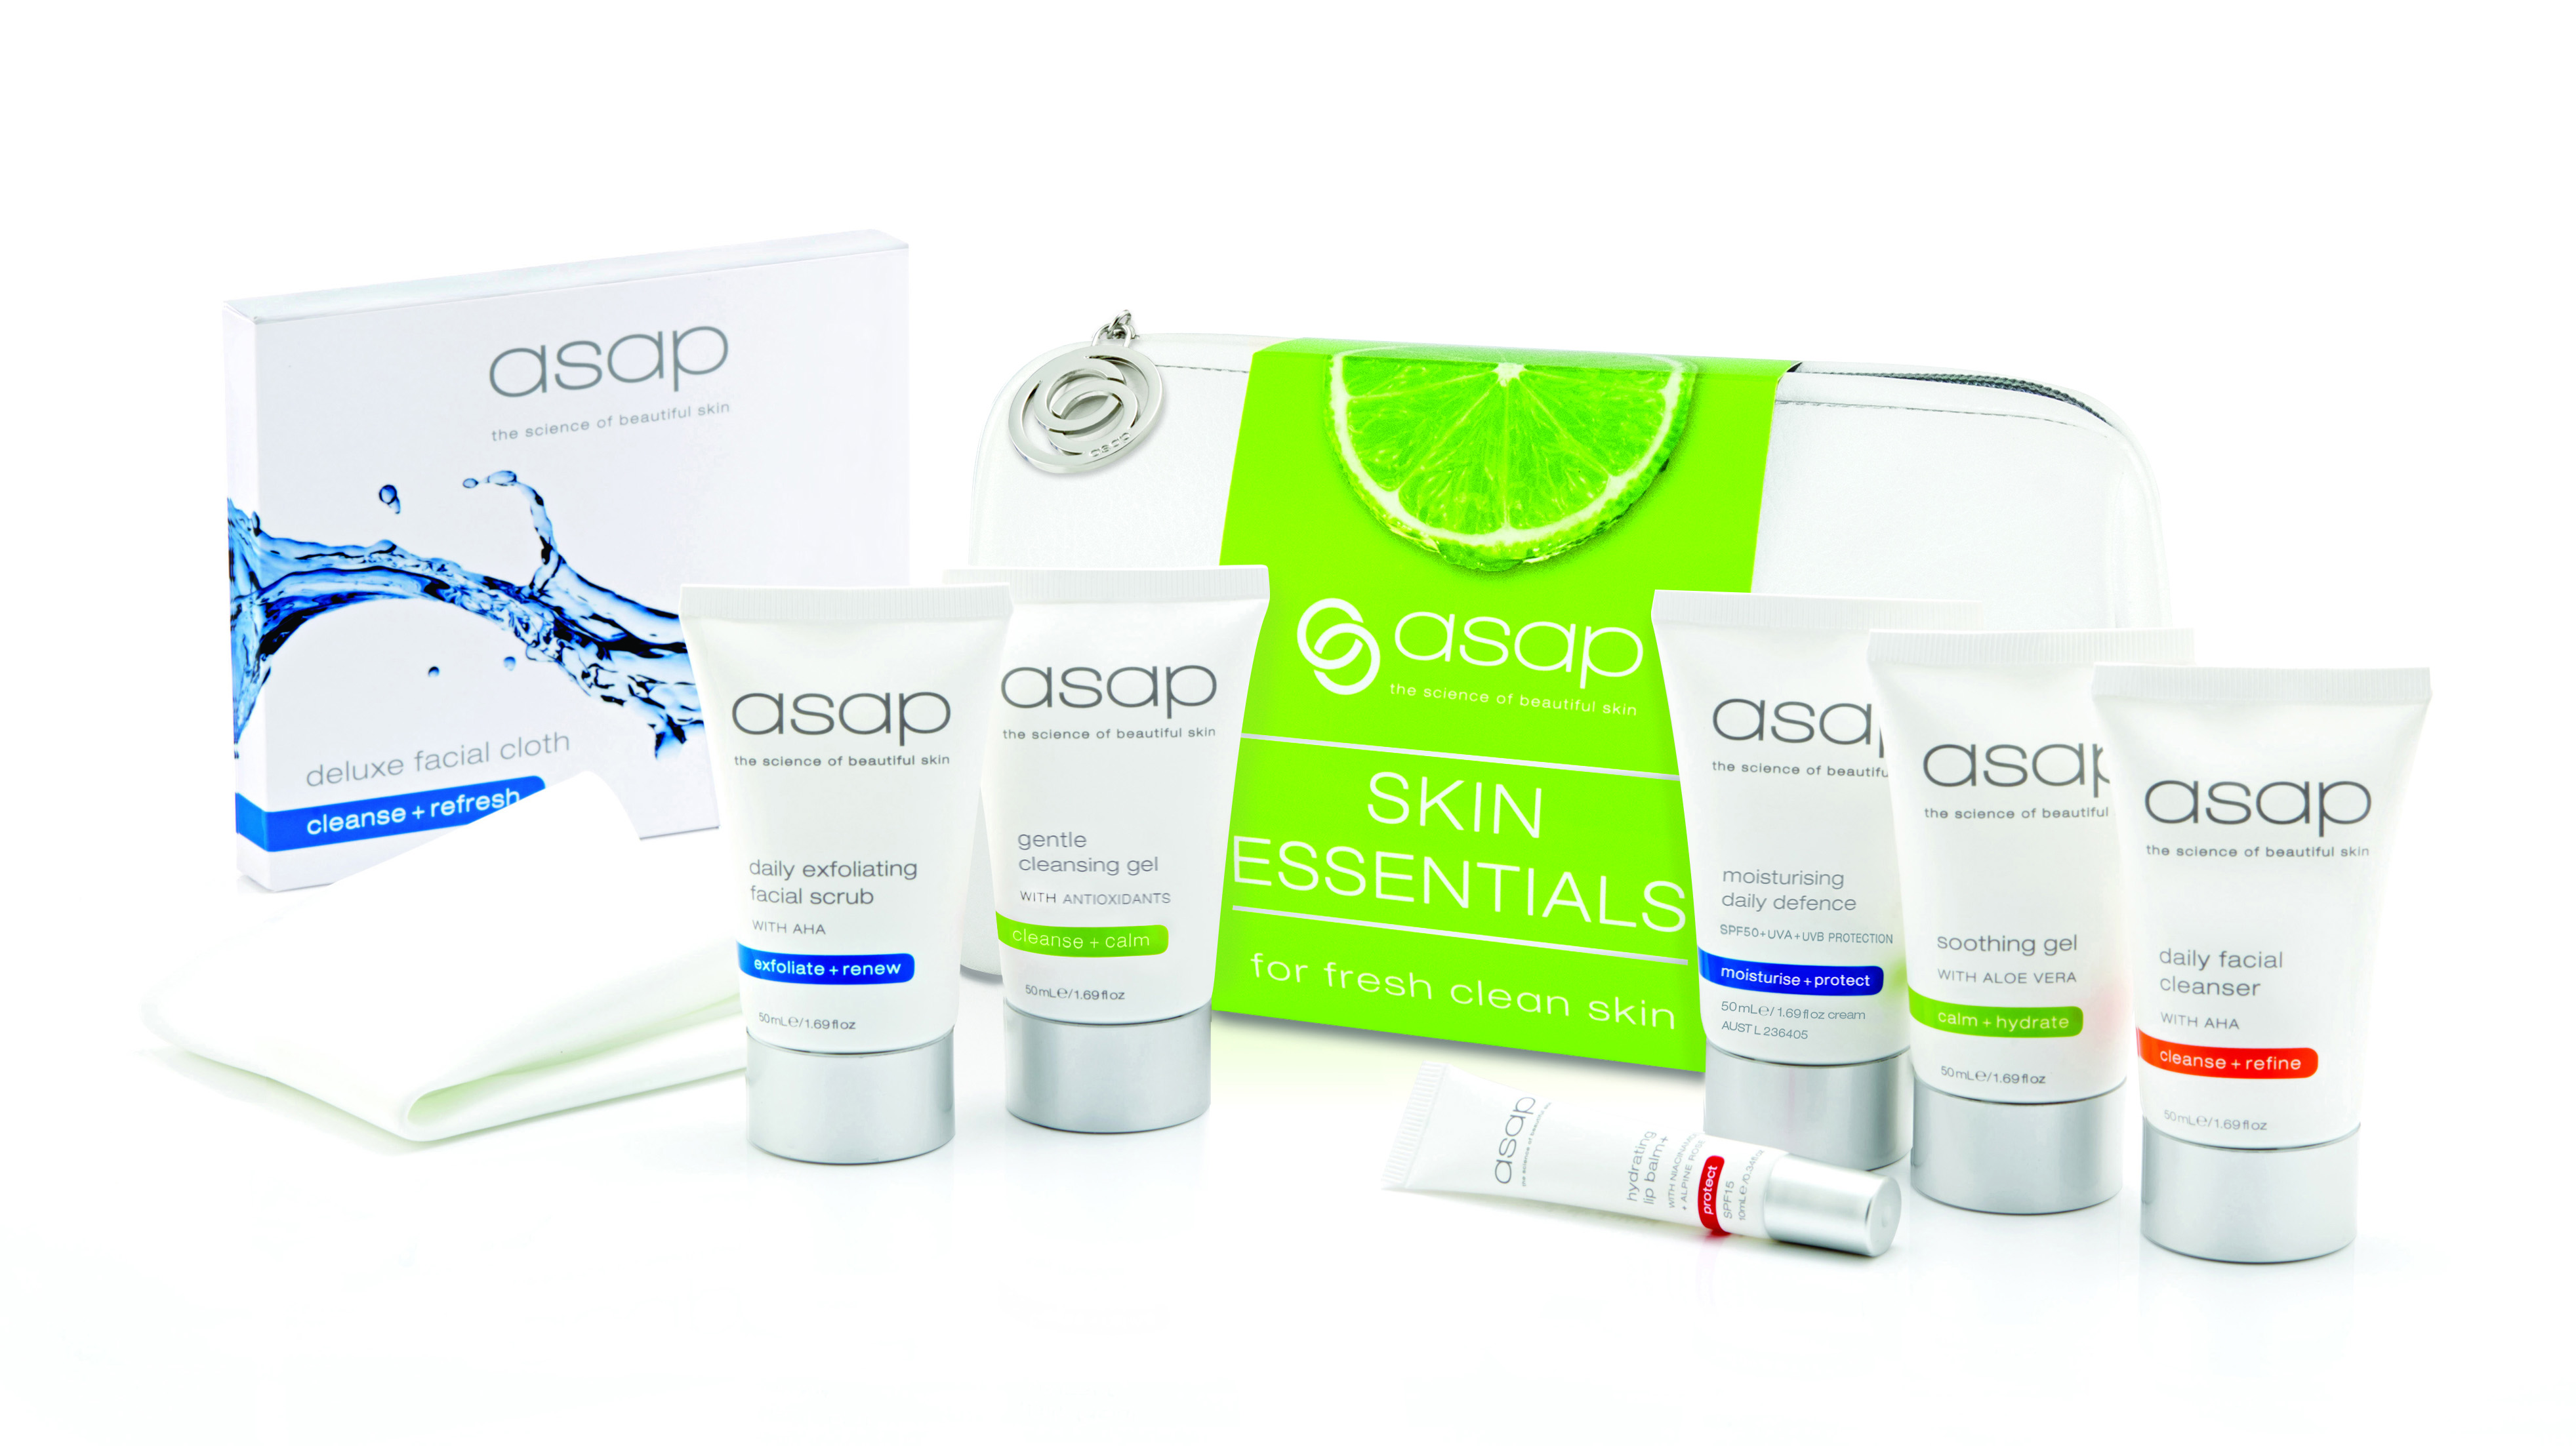 skin essentials pack by ASAP skincare